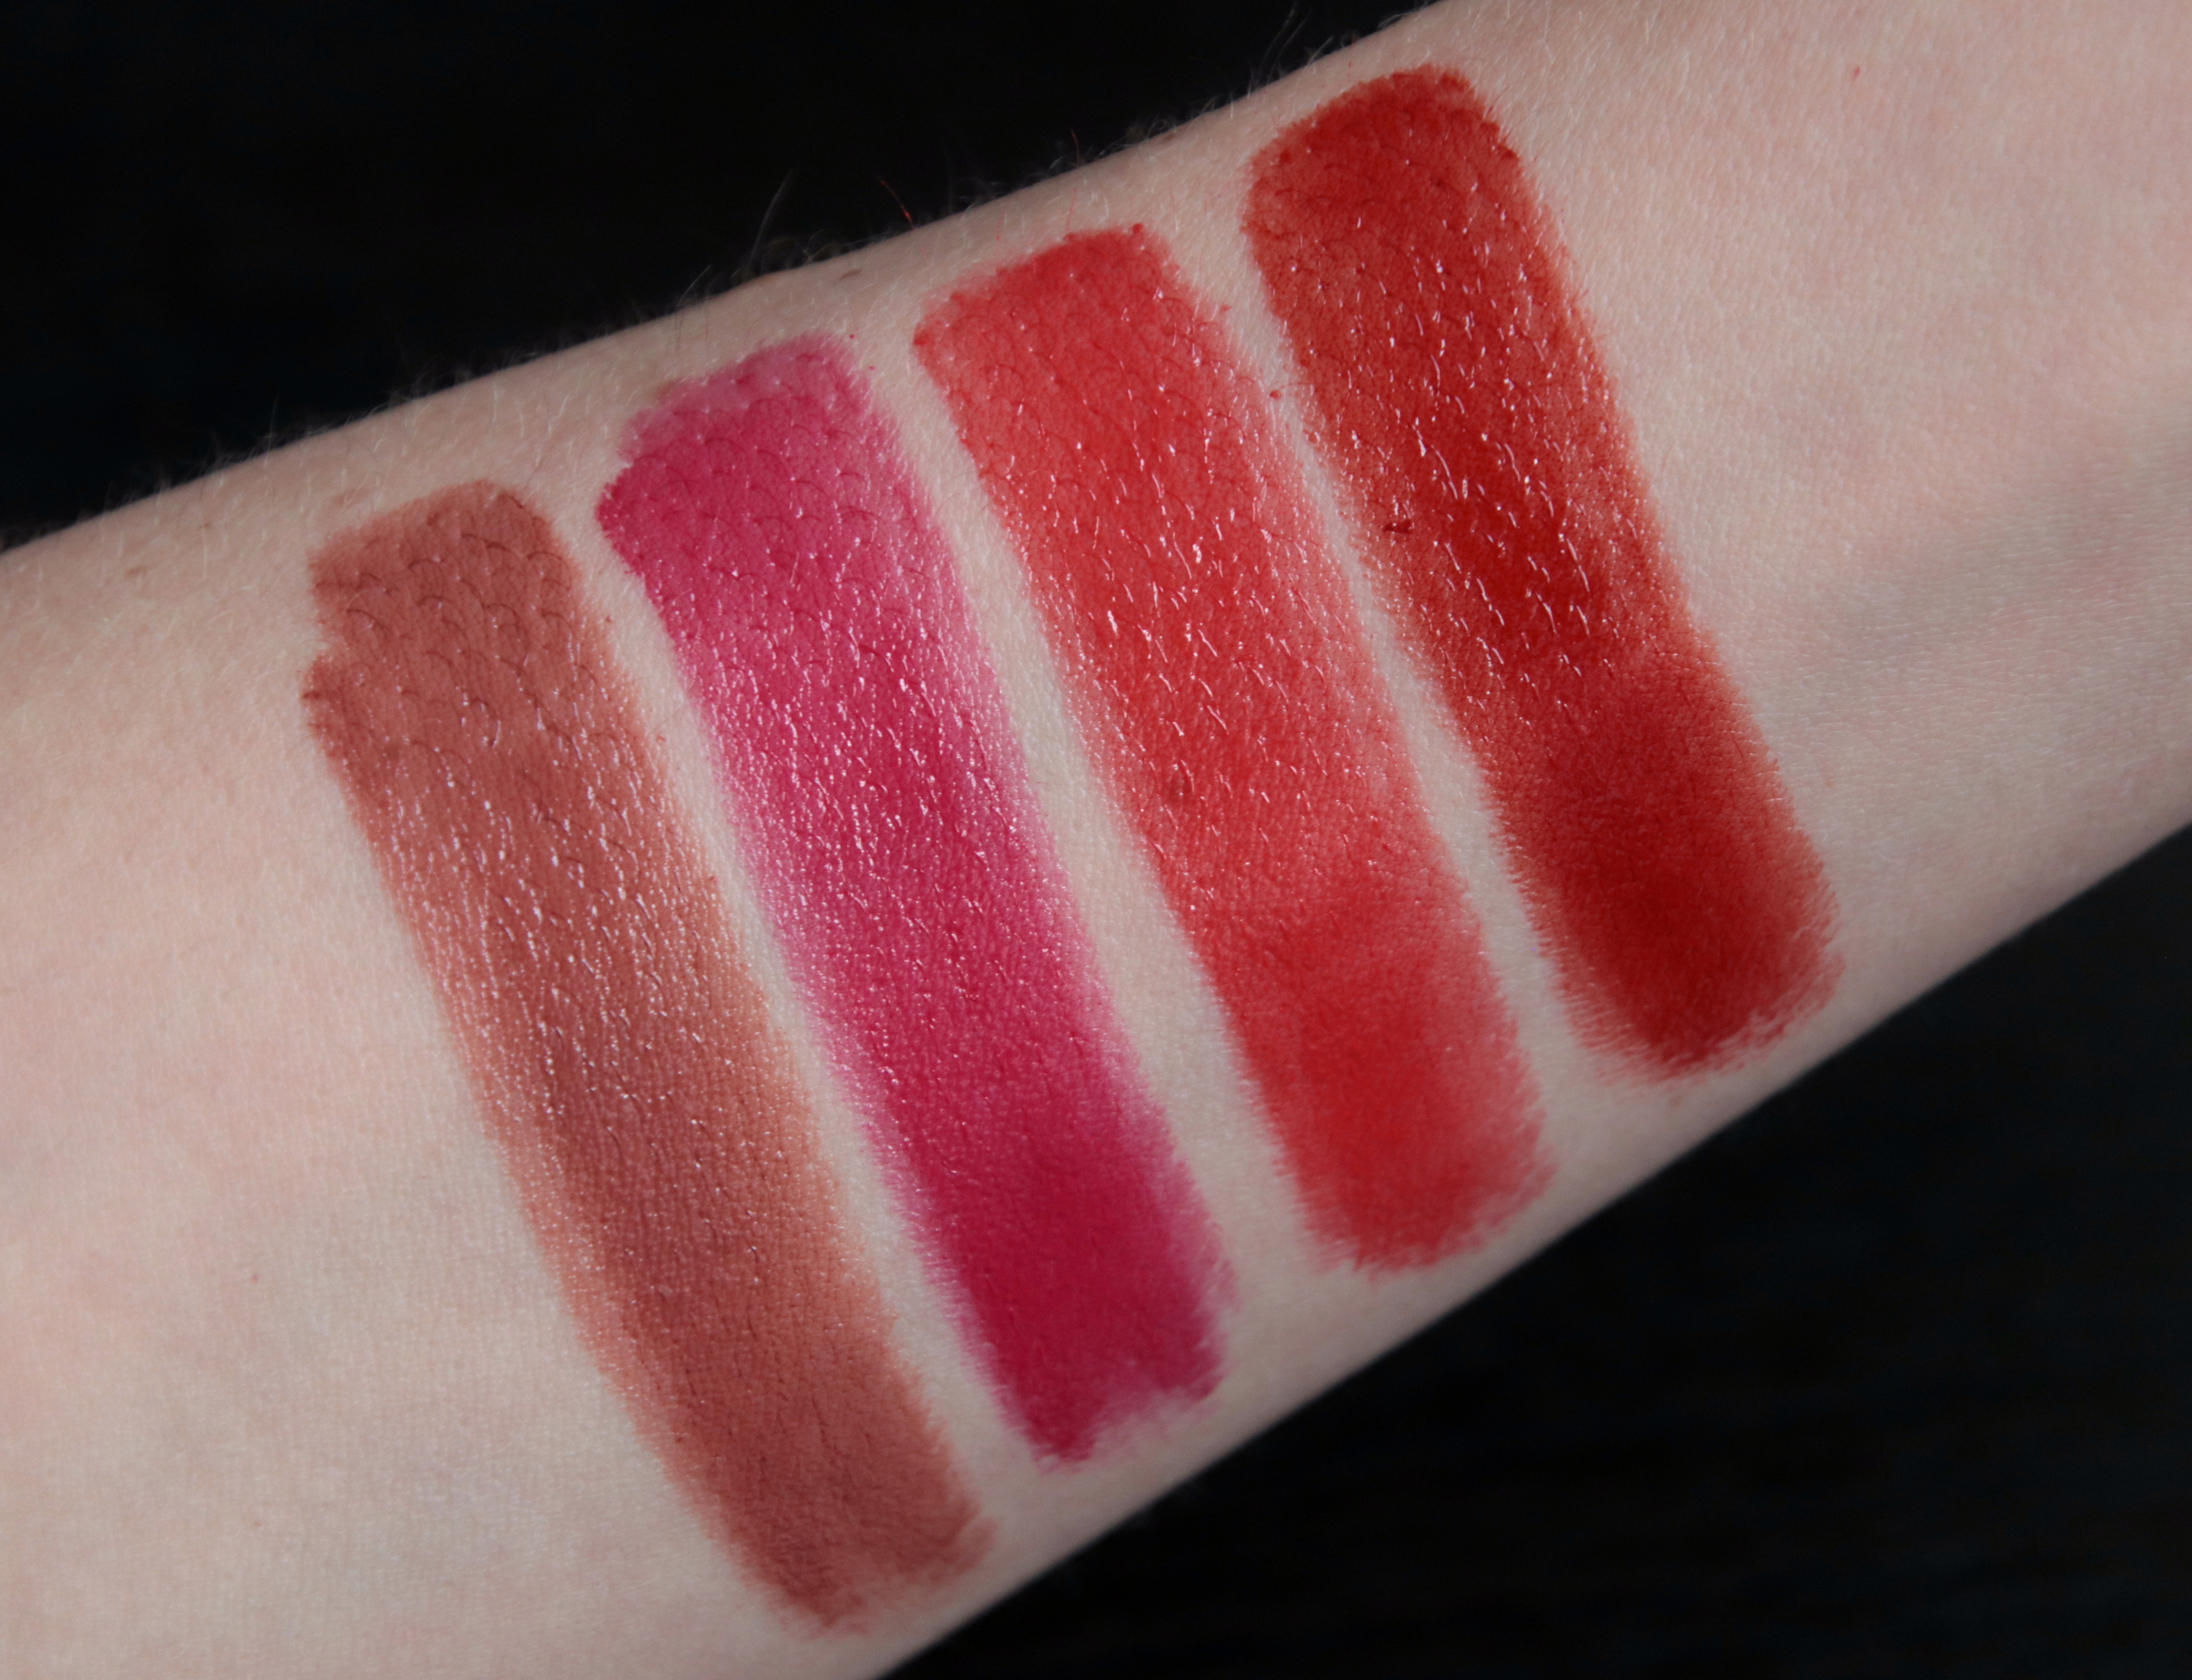 Rouge Dior Addict 717 Patchwork 877 Blooming Pink 744 Diorama Dior 8 swatch